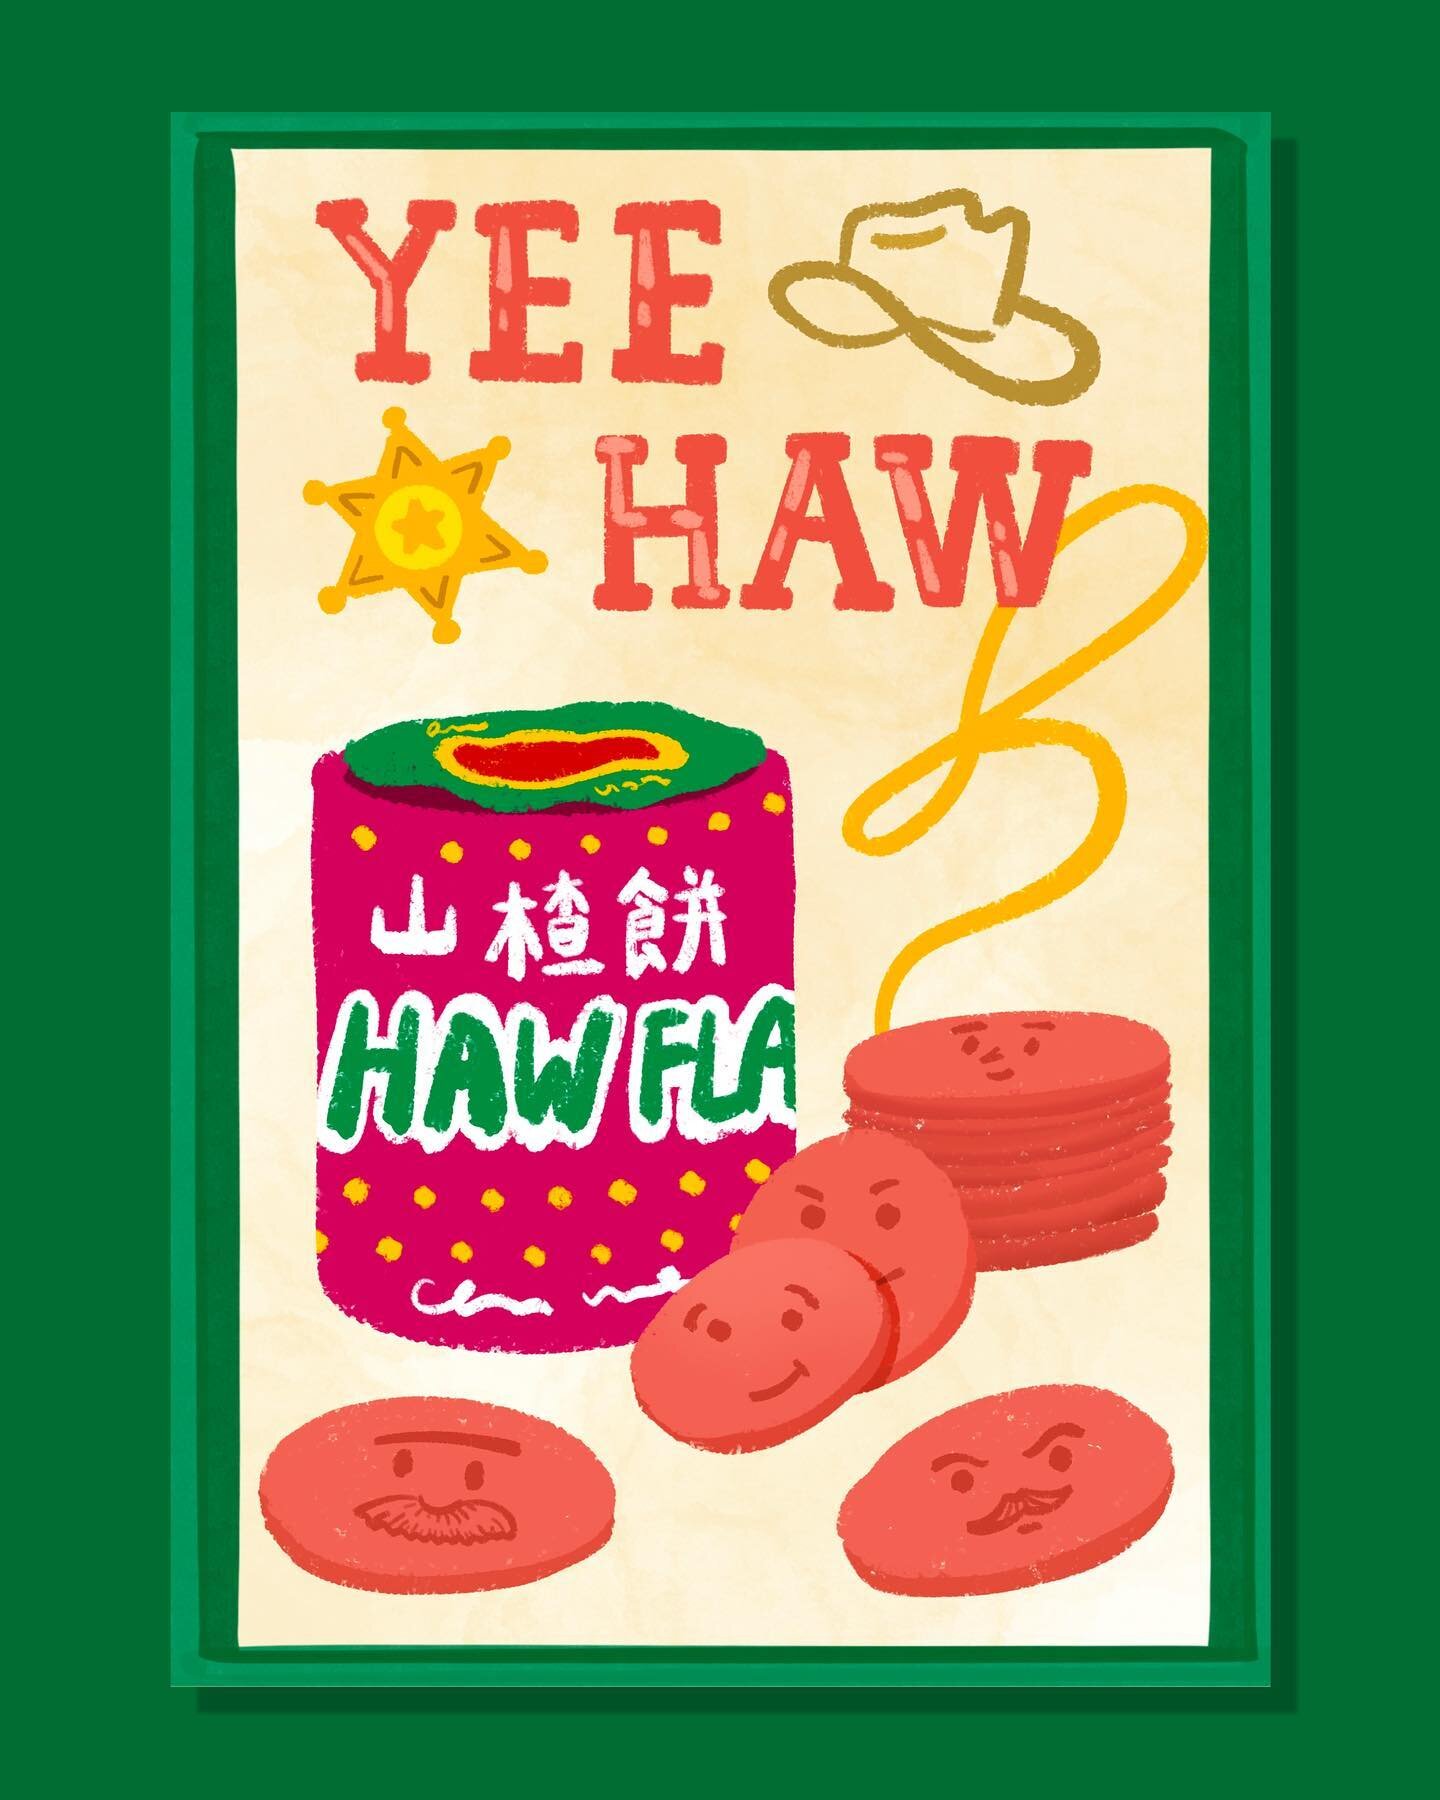 Yee haw 🤠💛🌟

These are haw flakes (山楂片/饼)... kind of like a small dessert chip/candy made from hawthorn fruits! I ate these a ton while growing up... I would say I liked them, but definitely wasn&rsquo;t my go-to snack 😂

Shout out to @dorothydoe